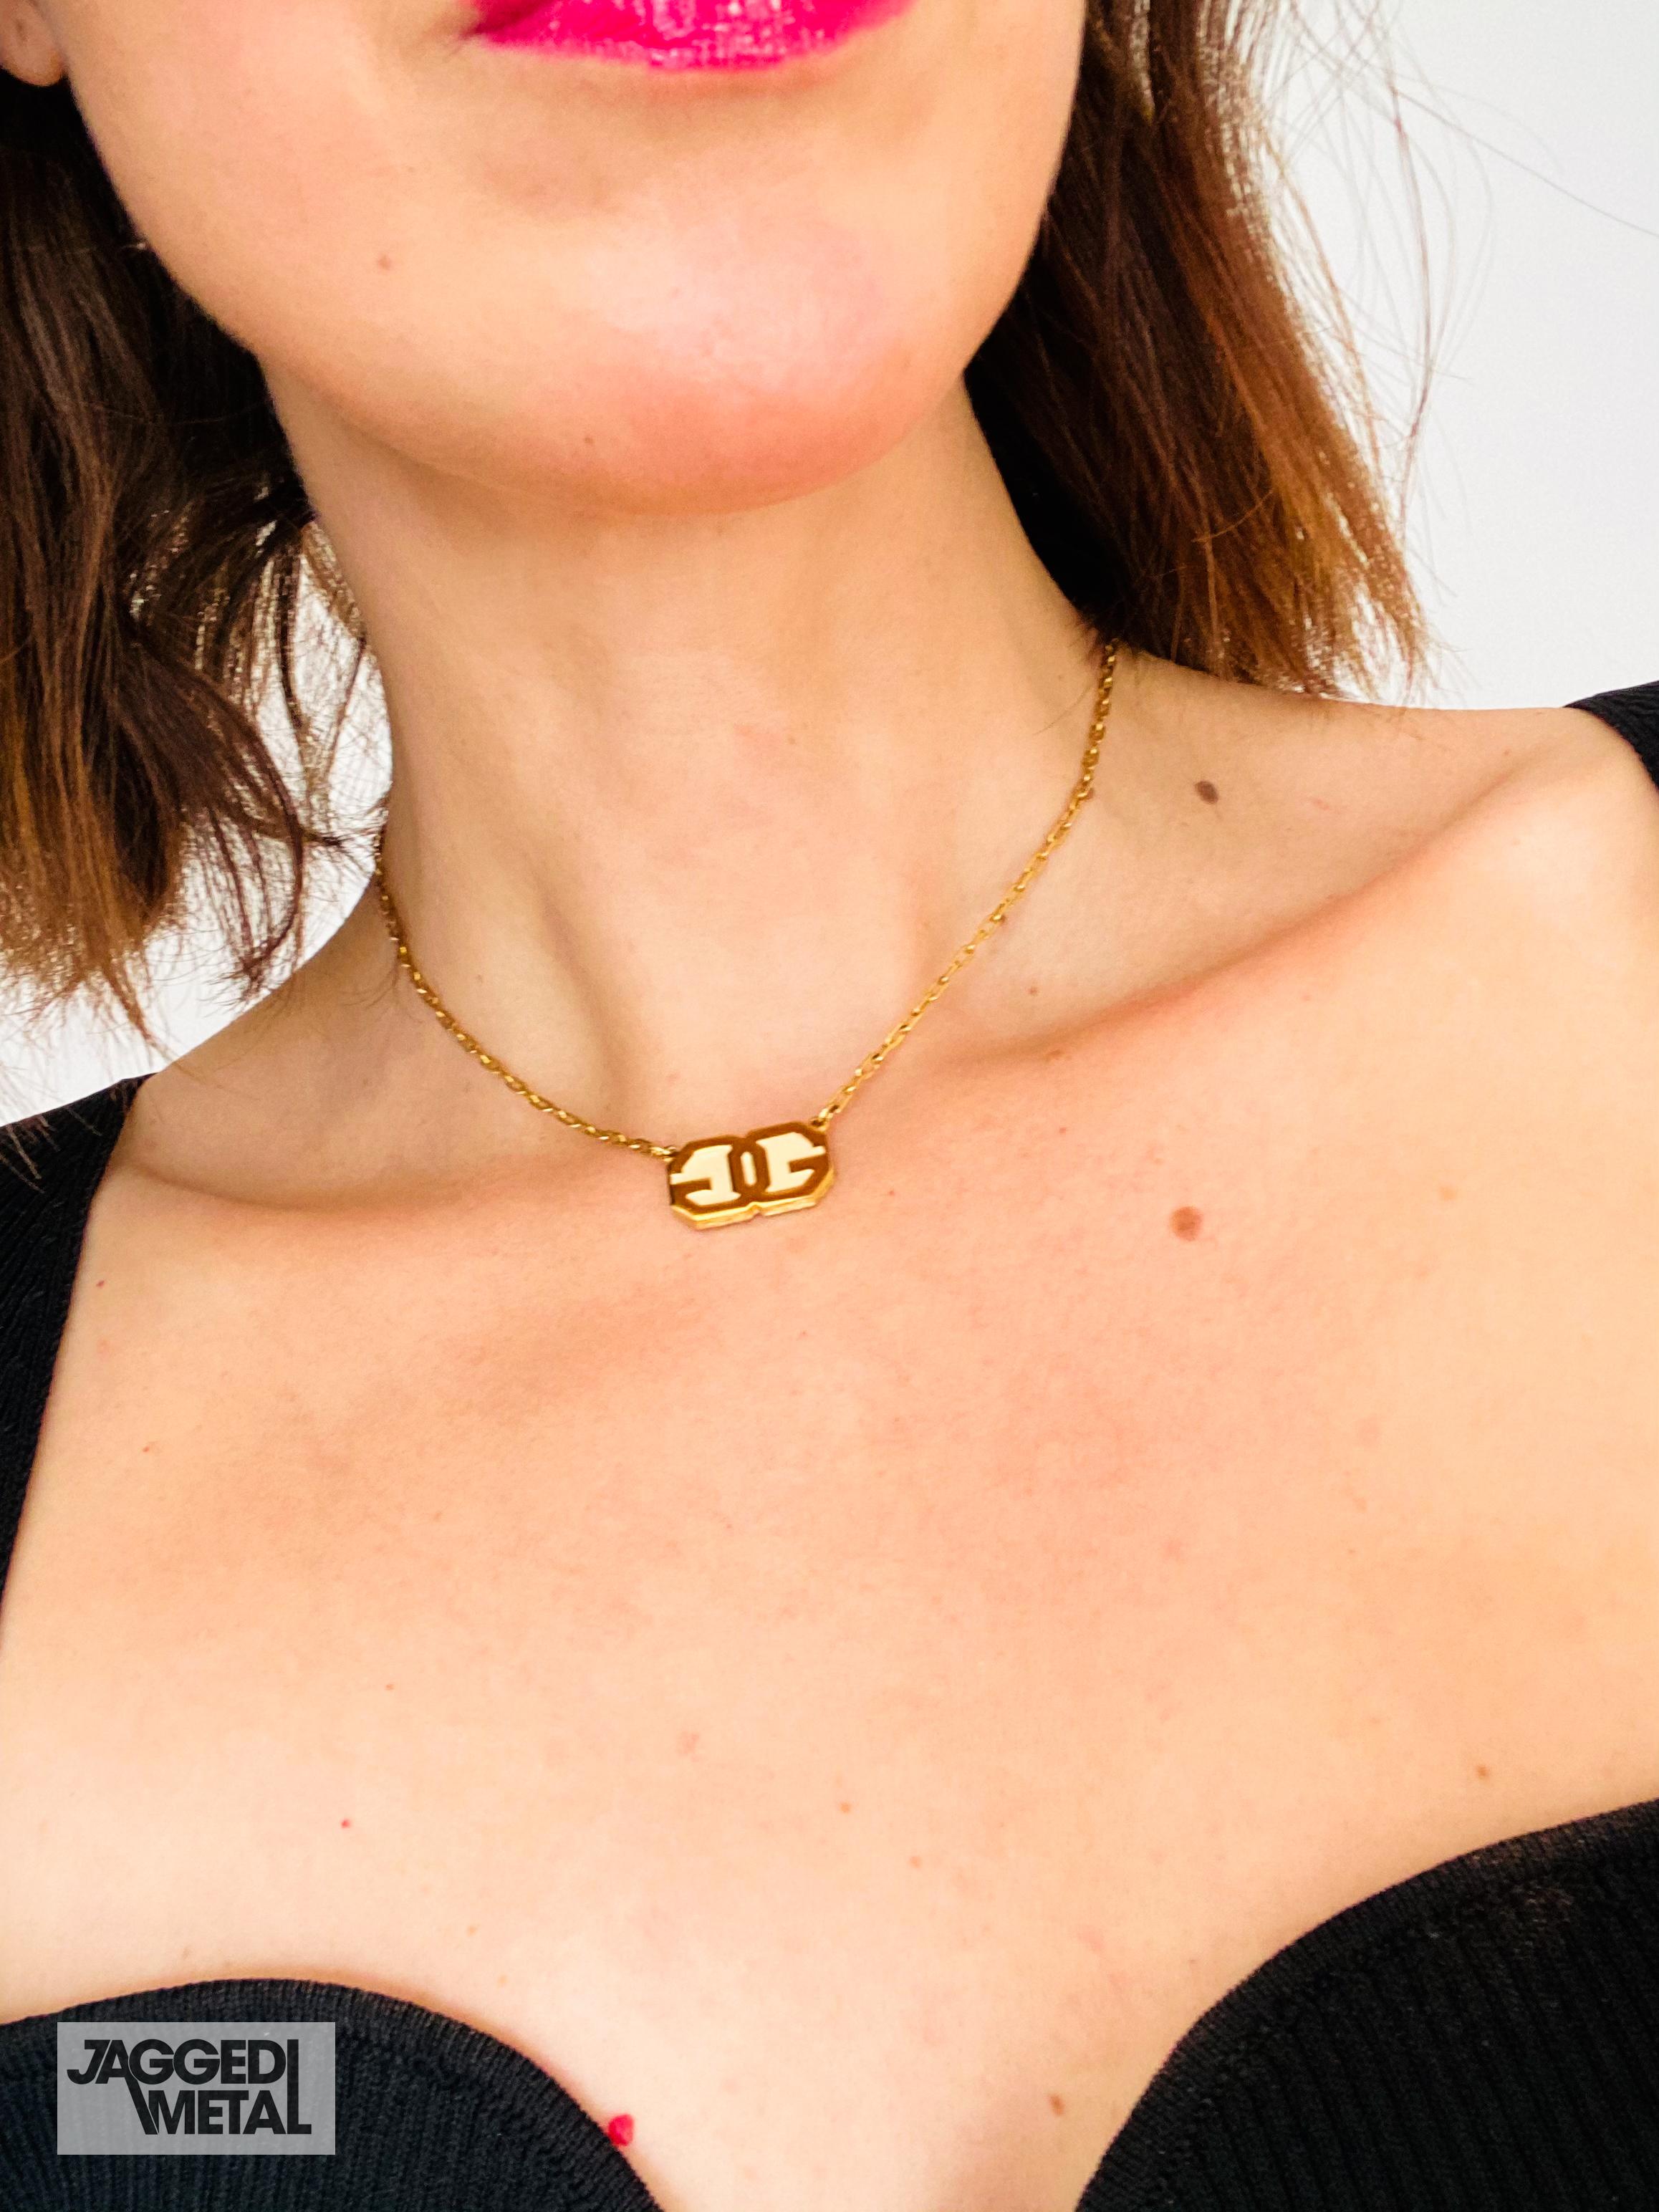 Givenchy Necklace Vintage 1970s
A super cool chain and pendant from the Givenchy 1970s archive - their hey day of jewellery when pieces were made with great quality and care

Detail
-Made in France in the 1970s
-Crafted from gold plated metal
-Fine